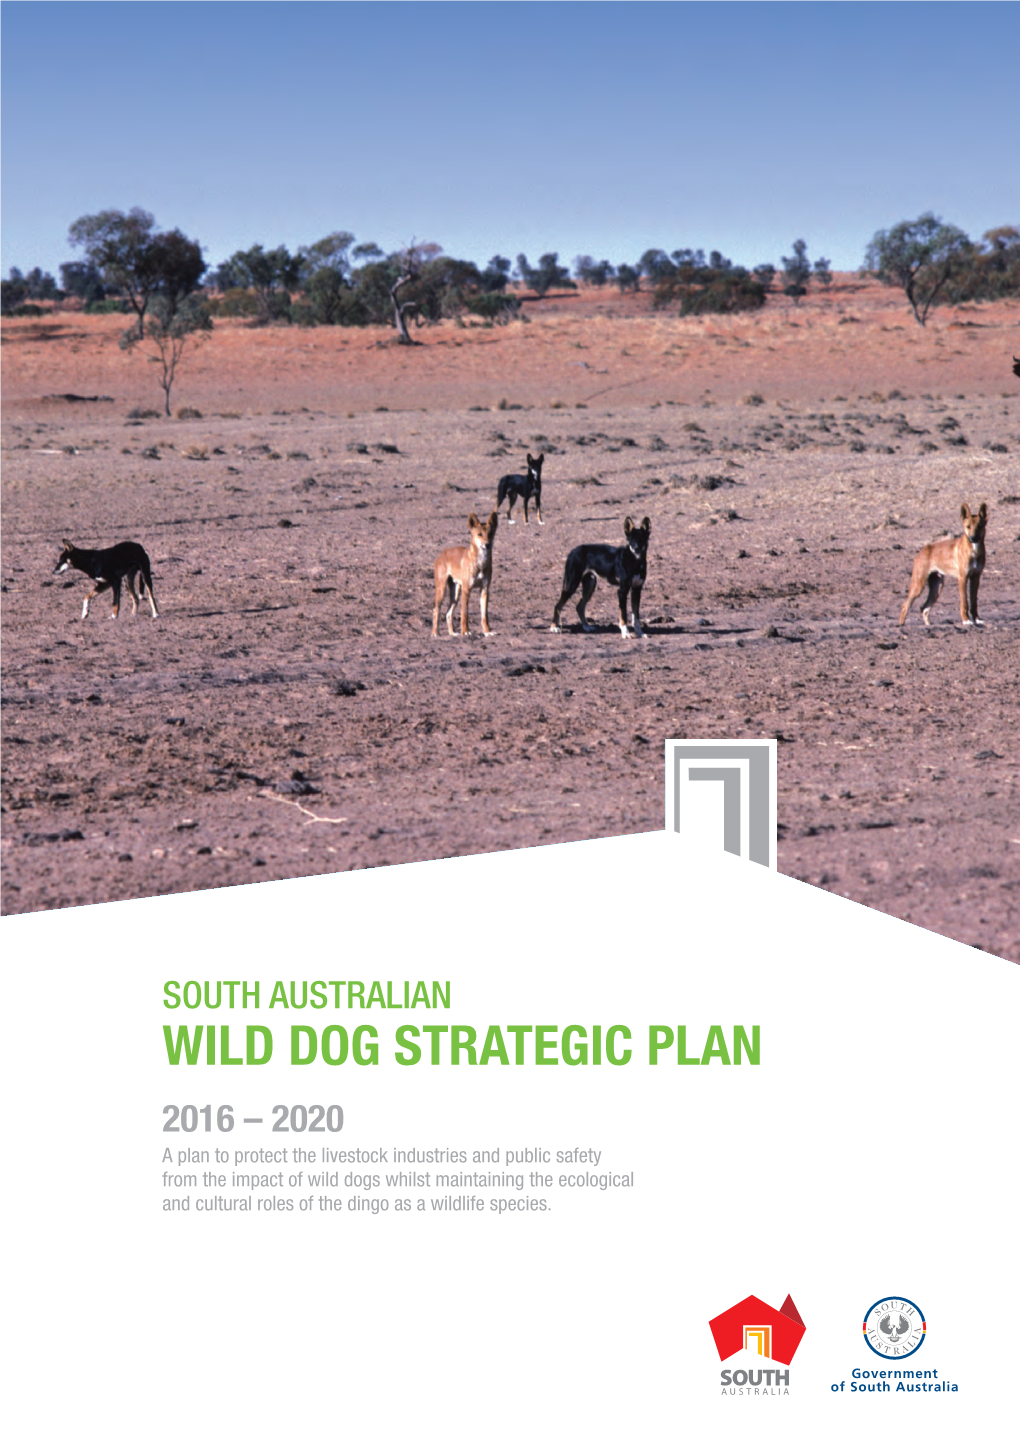 South Australian Wild Dog Strategic Plan 2016-2020 to Provide for the Protection of Livestock and the Sustainable Maintenance of Wild Dog Populations